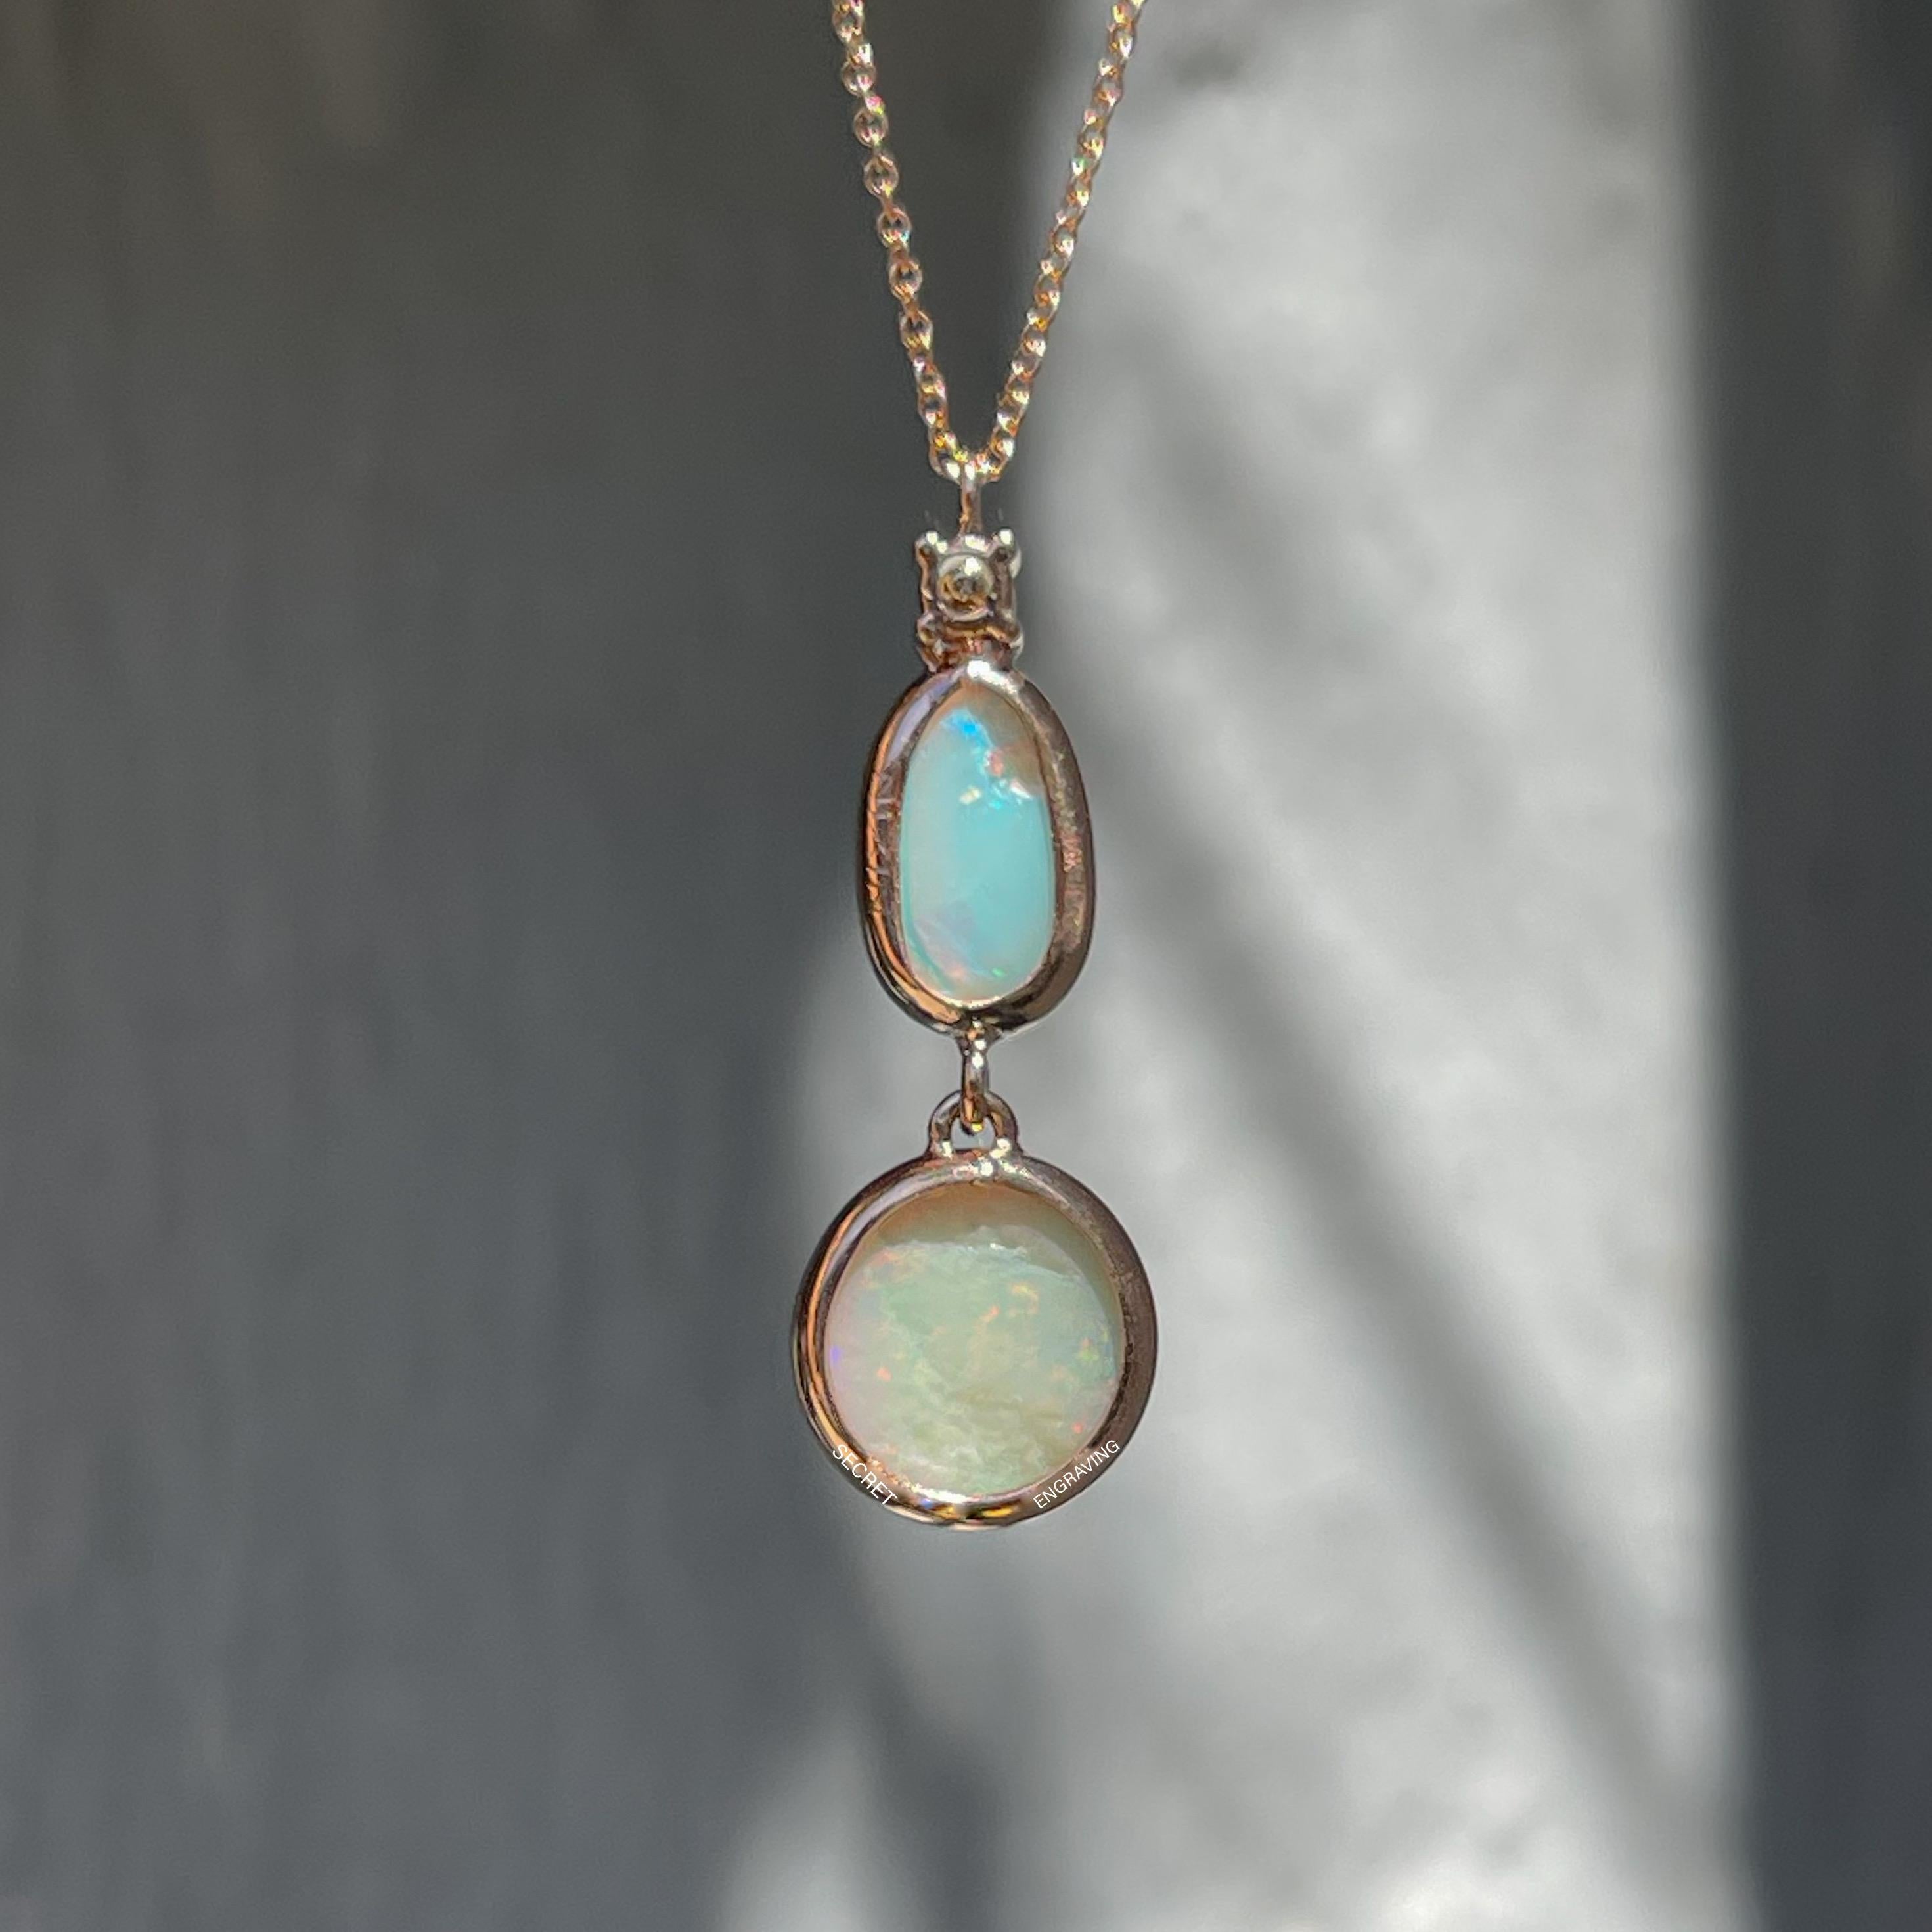 NIXIN Jewelry Cadence Australian Opal Necklace with Diamond Pendant in Rose Gold 3